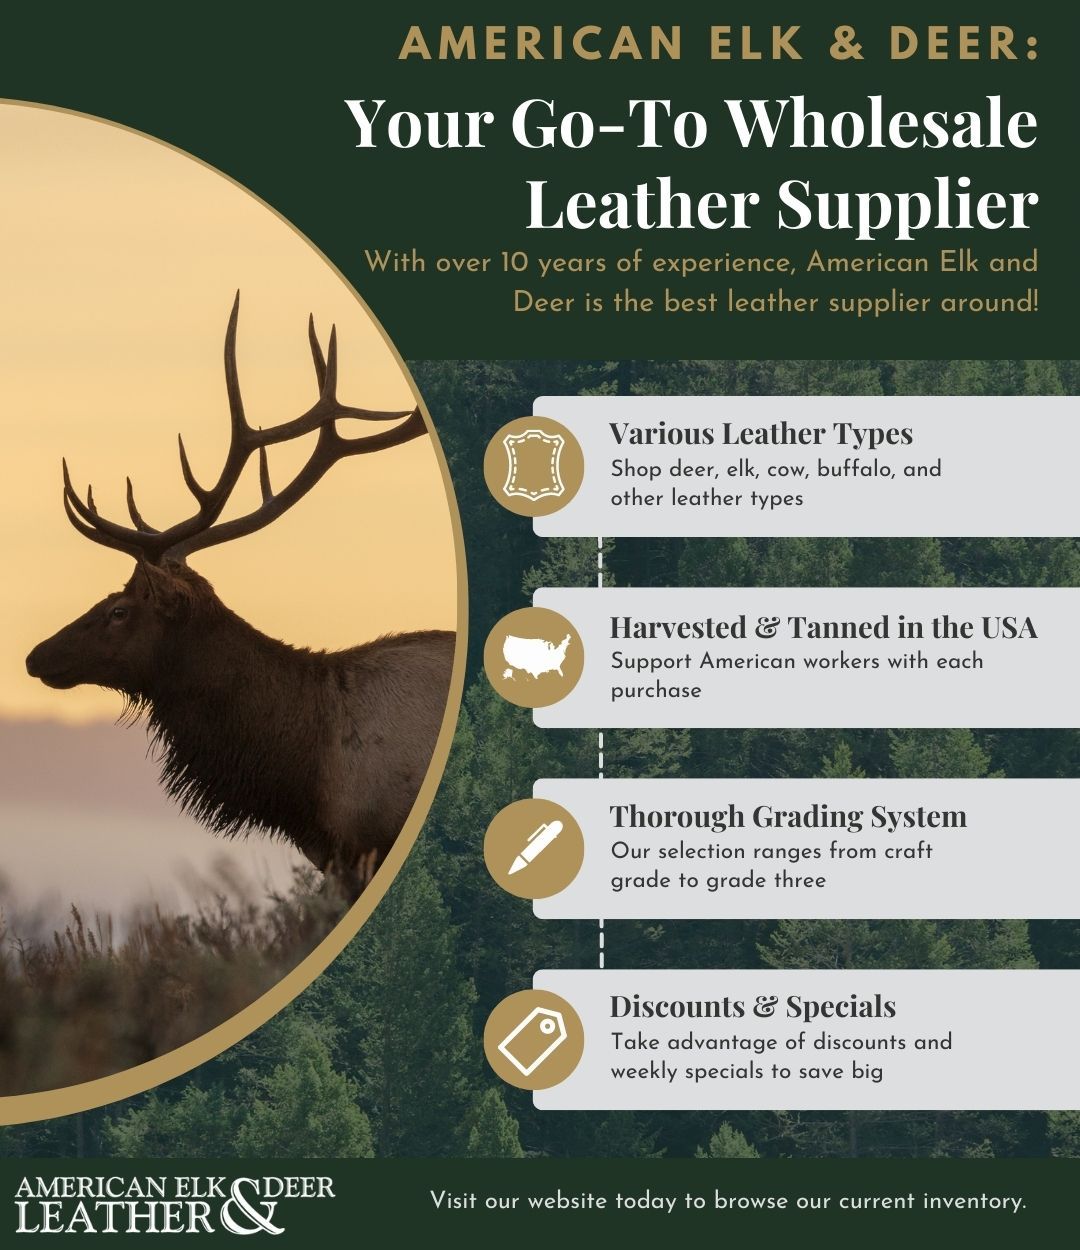 Why American Elk and Deer Should Be Your Wholesale Leather Provider